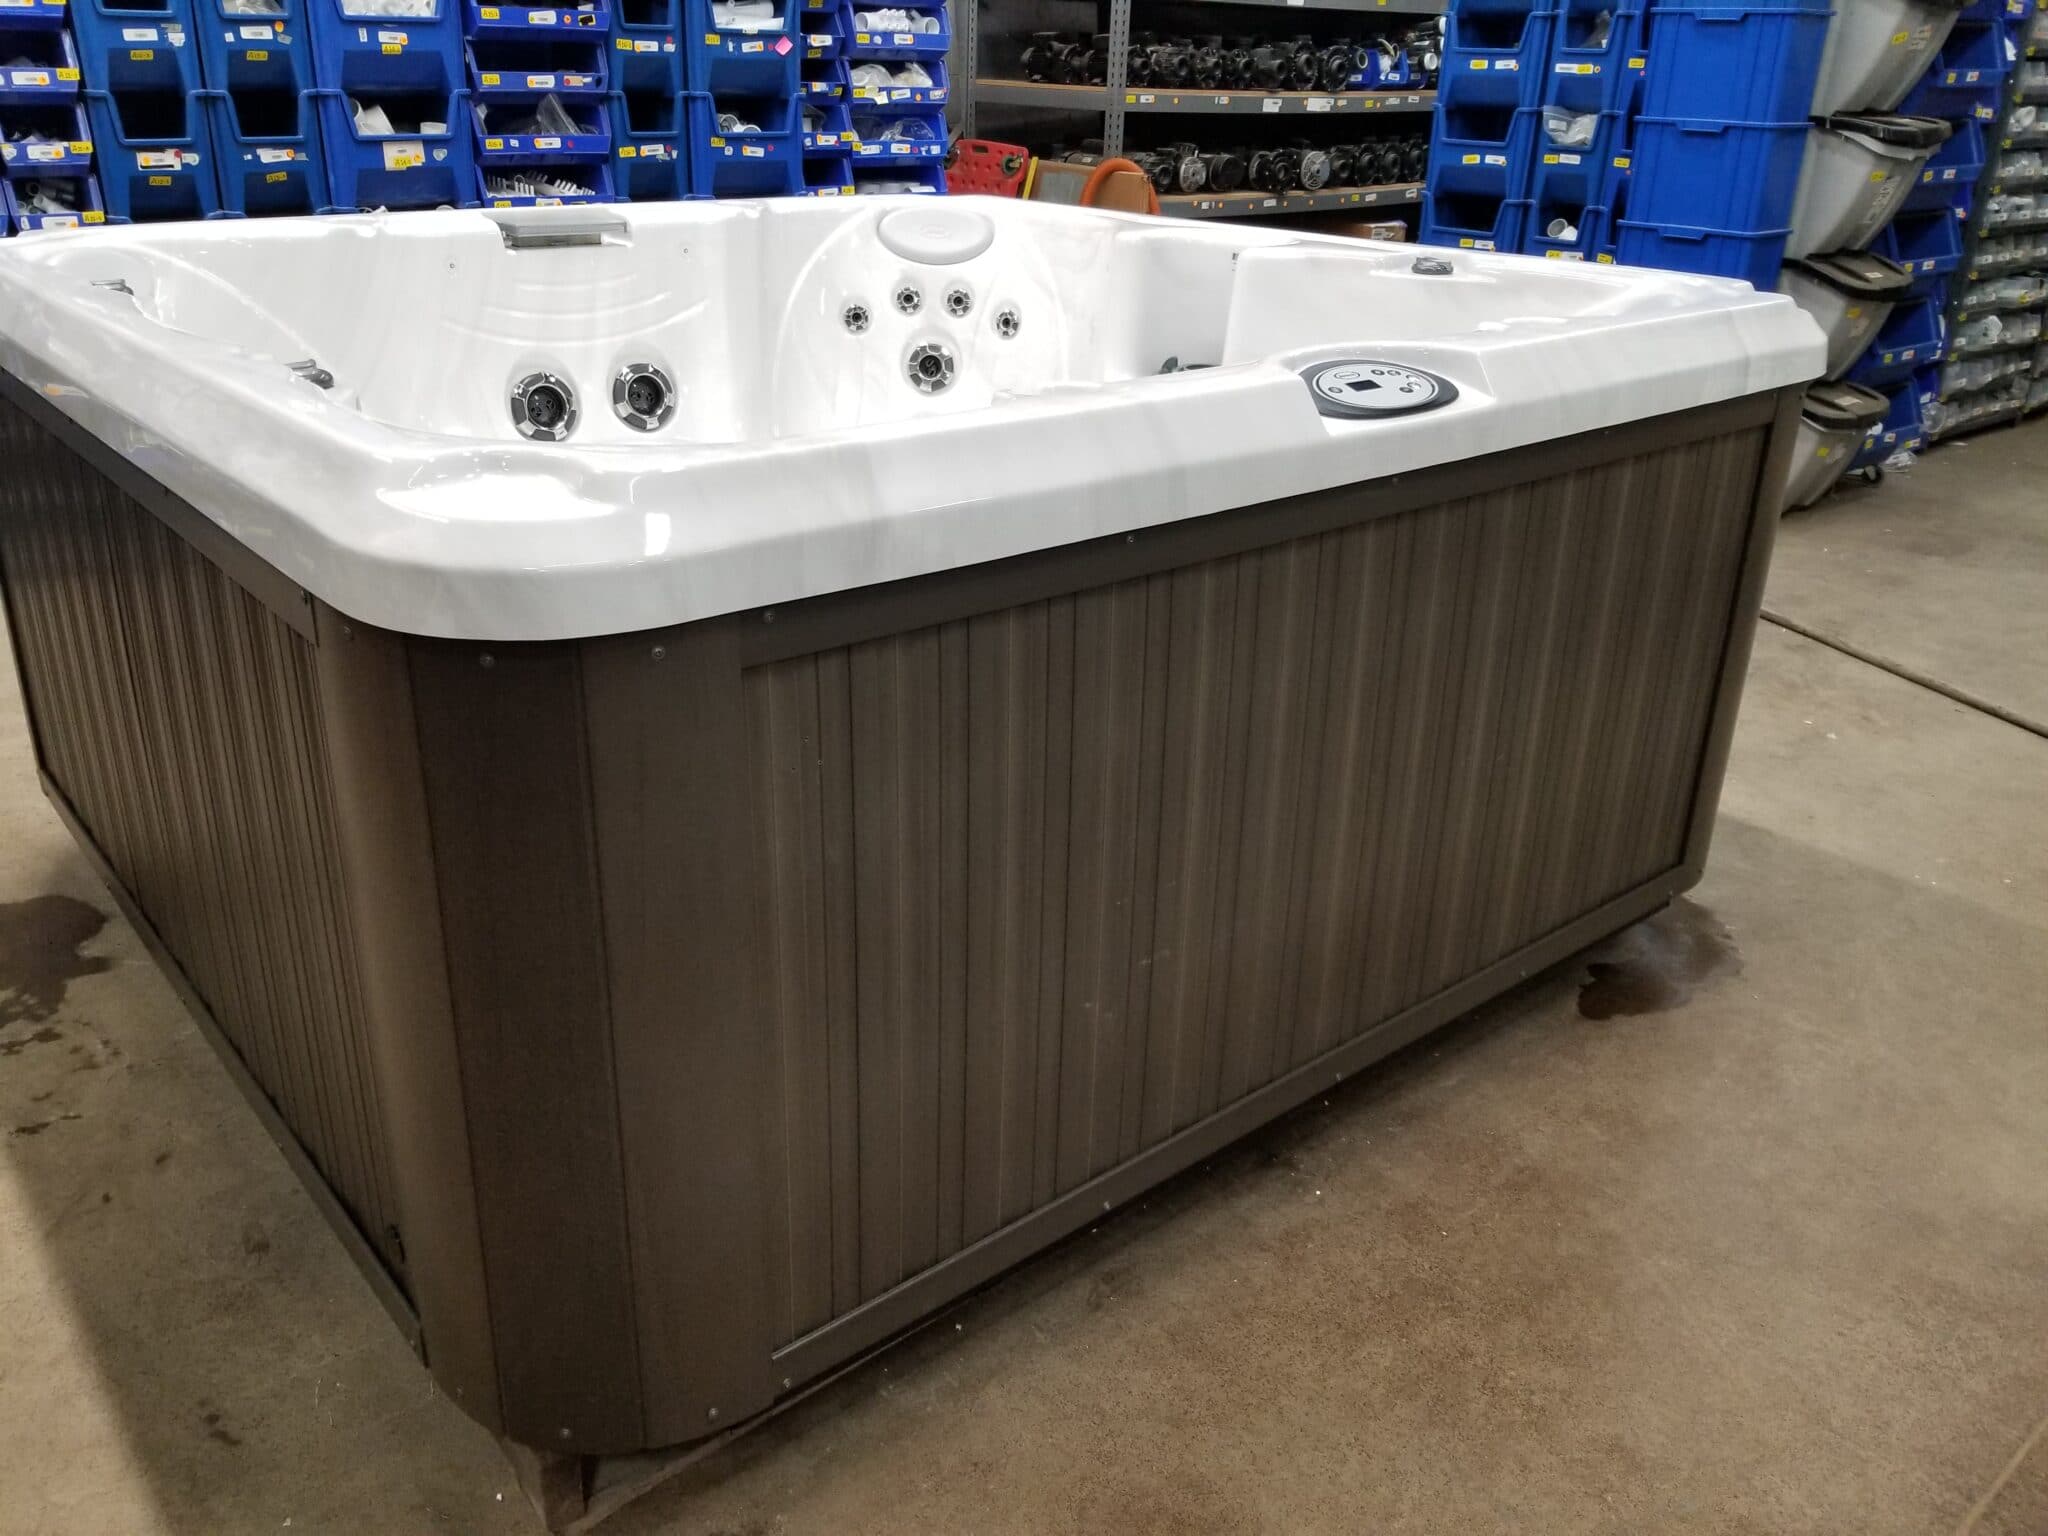 How To Sell A Used Hot Tub